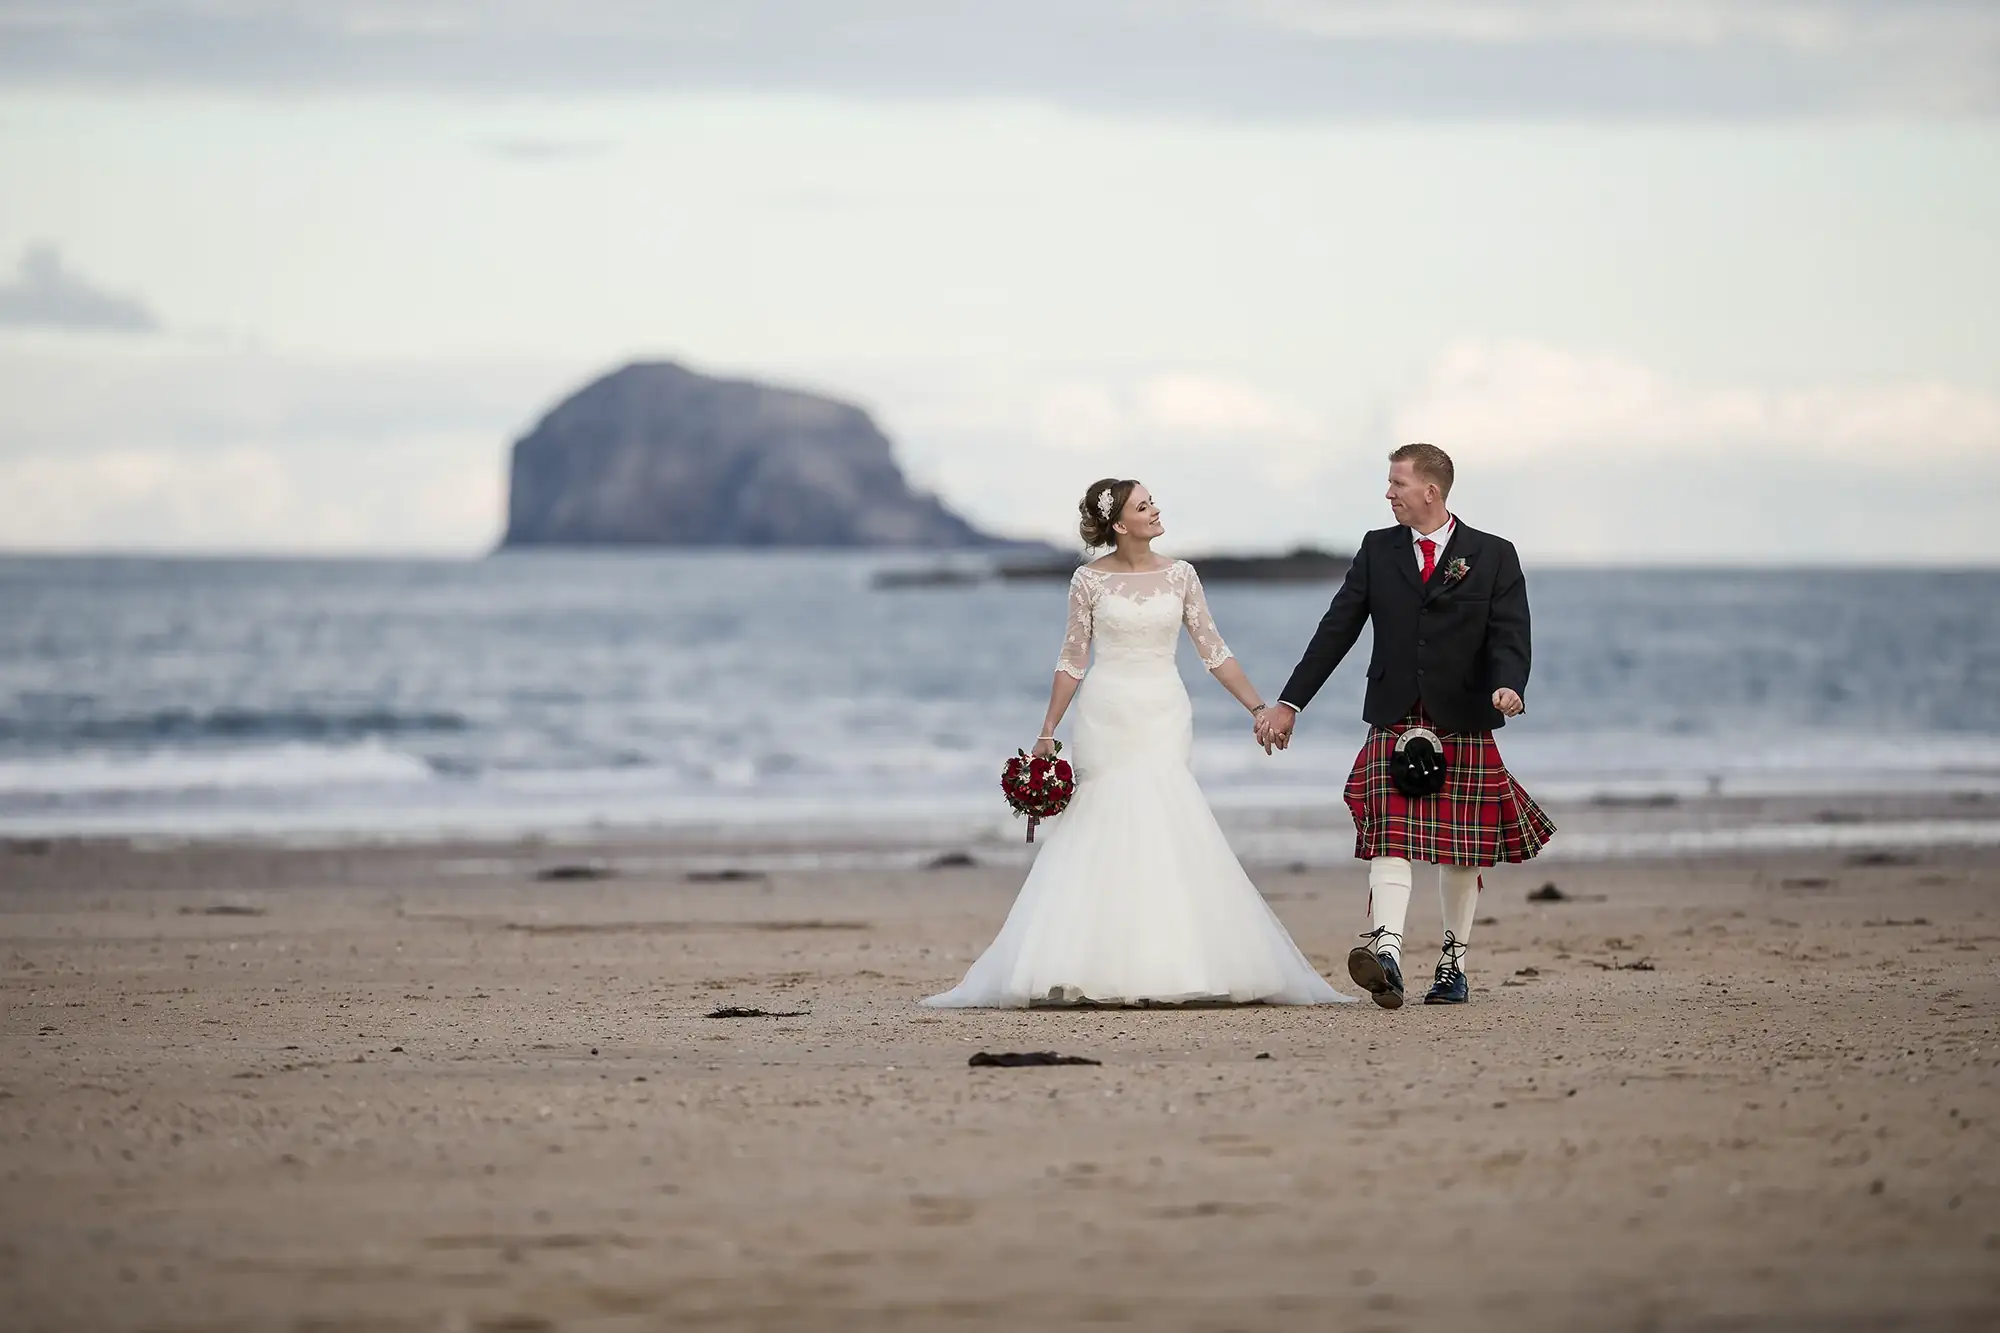 North Berwick Beach newlyweds with the Bass Rock in the background